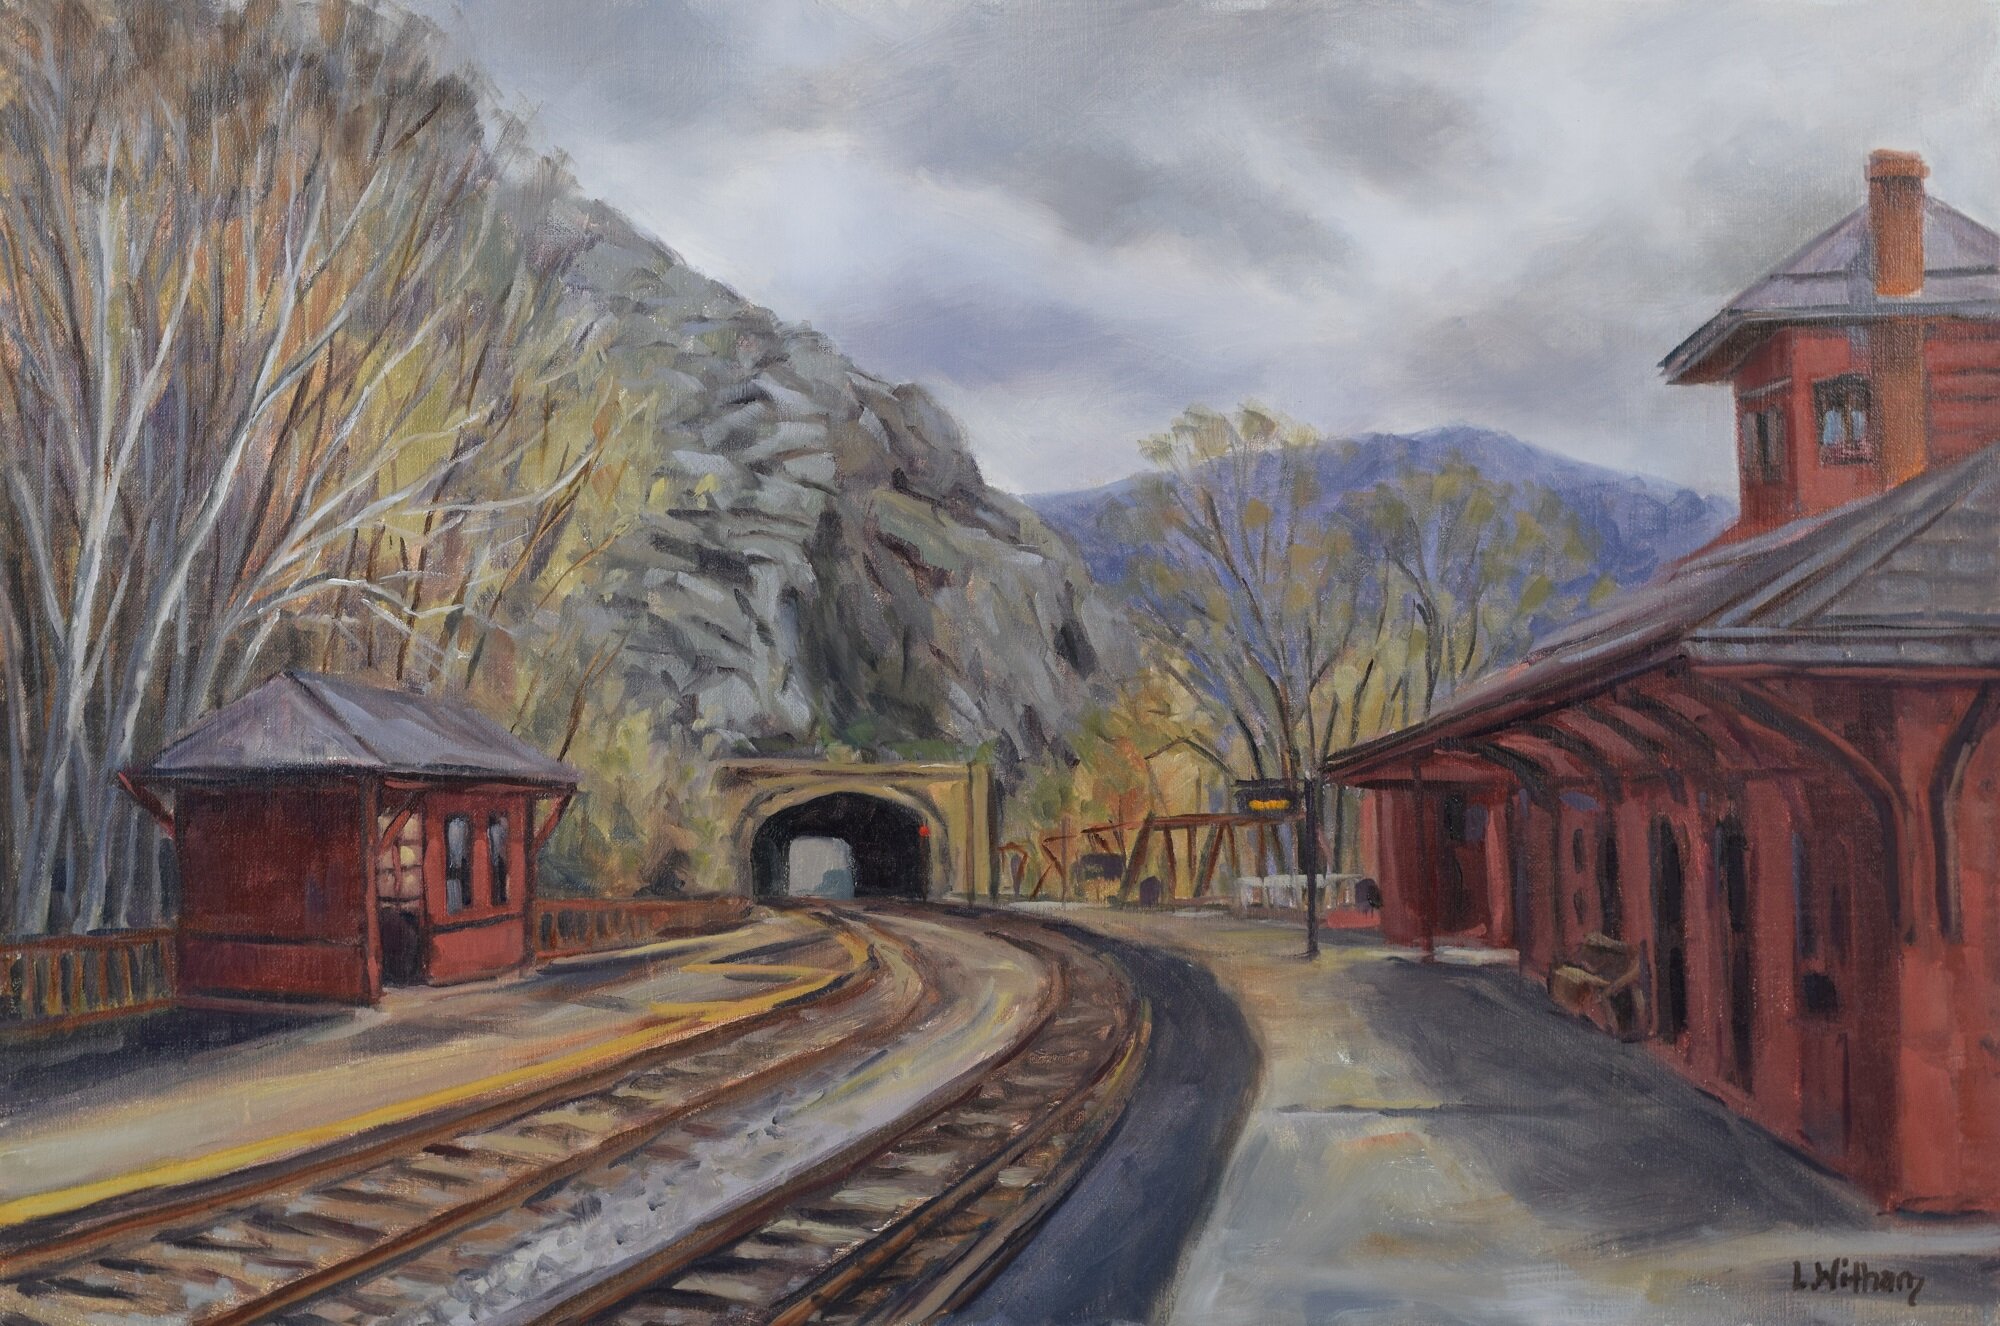 Harpers Ferry Tunnel, Oil on linen, 12x16